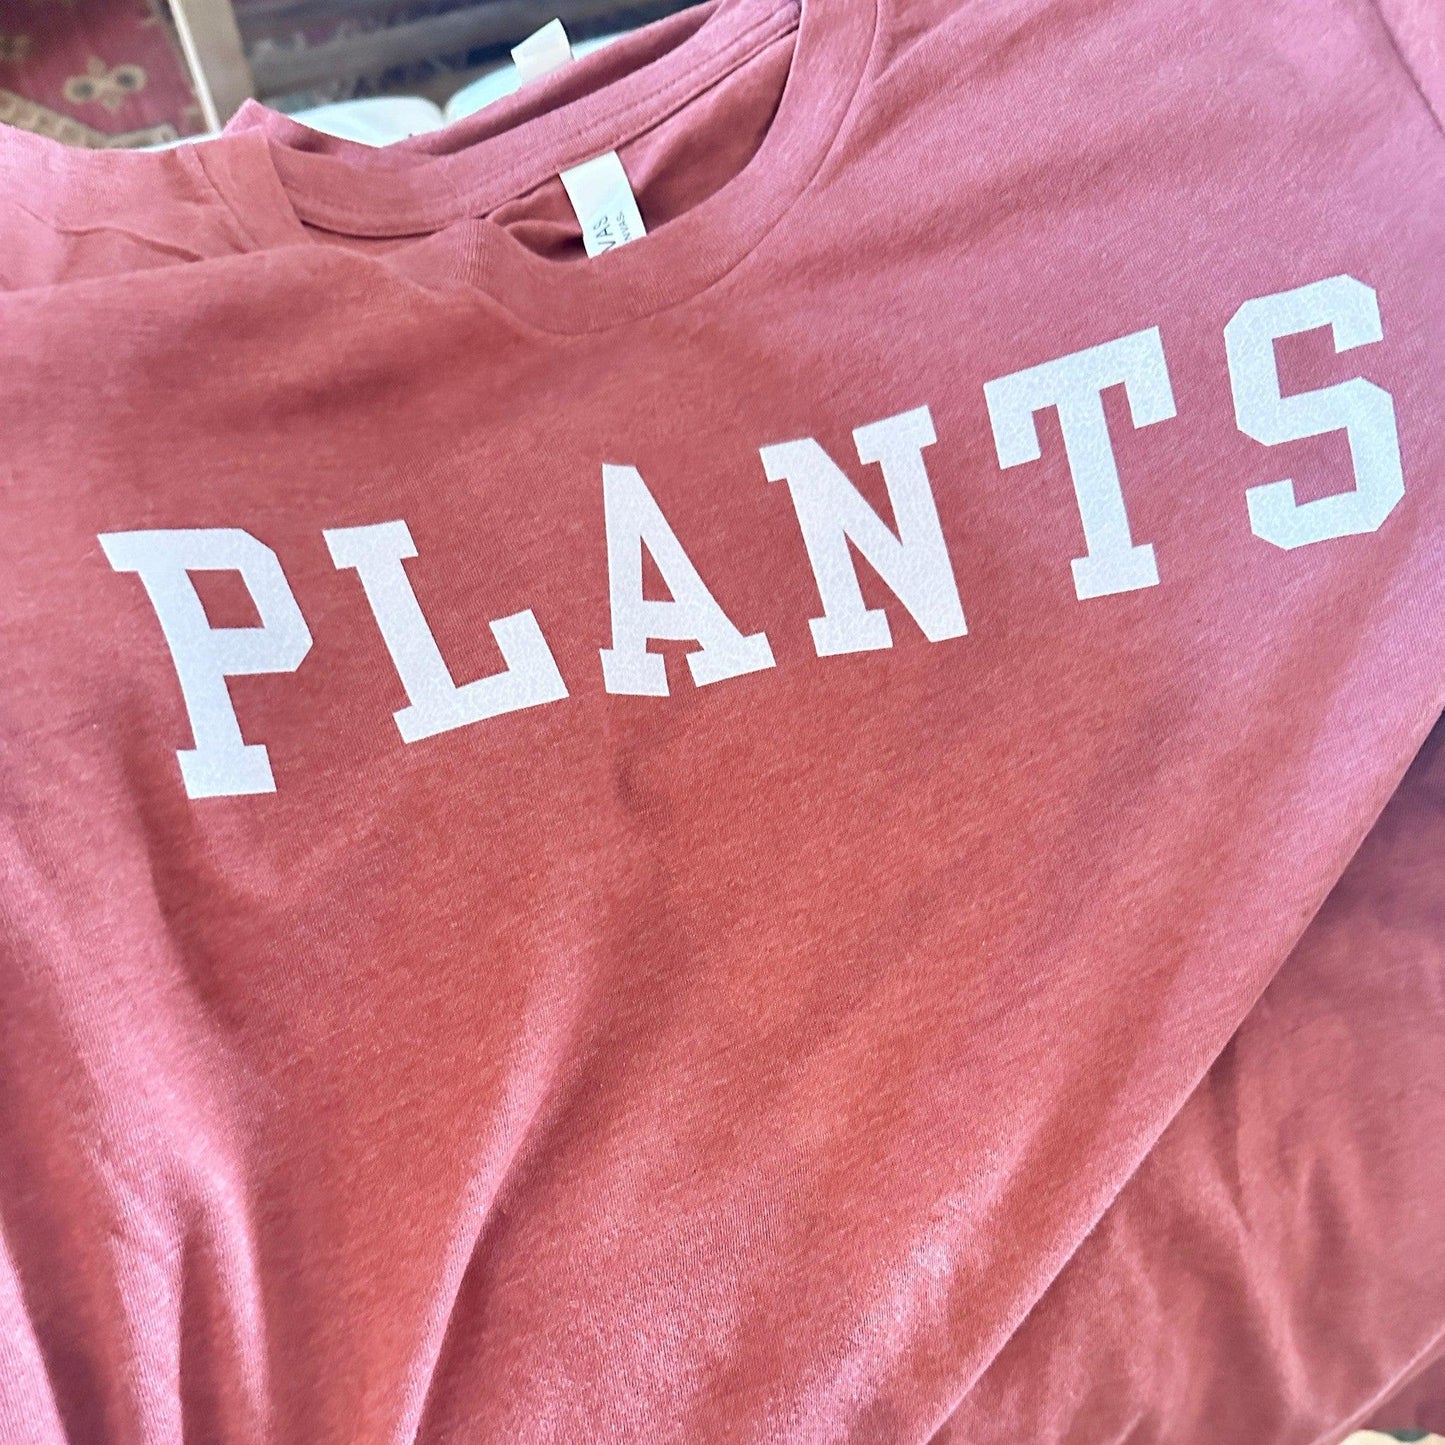 Tee’s + Sweatshirts (PLANTS on Front Logo on Back)-available at Hidden Seed Plant Shop